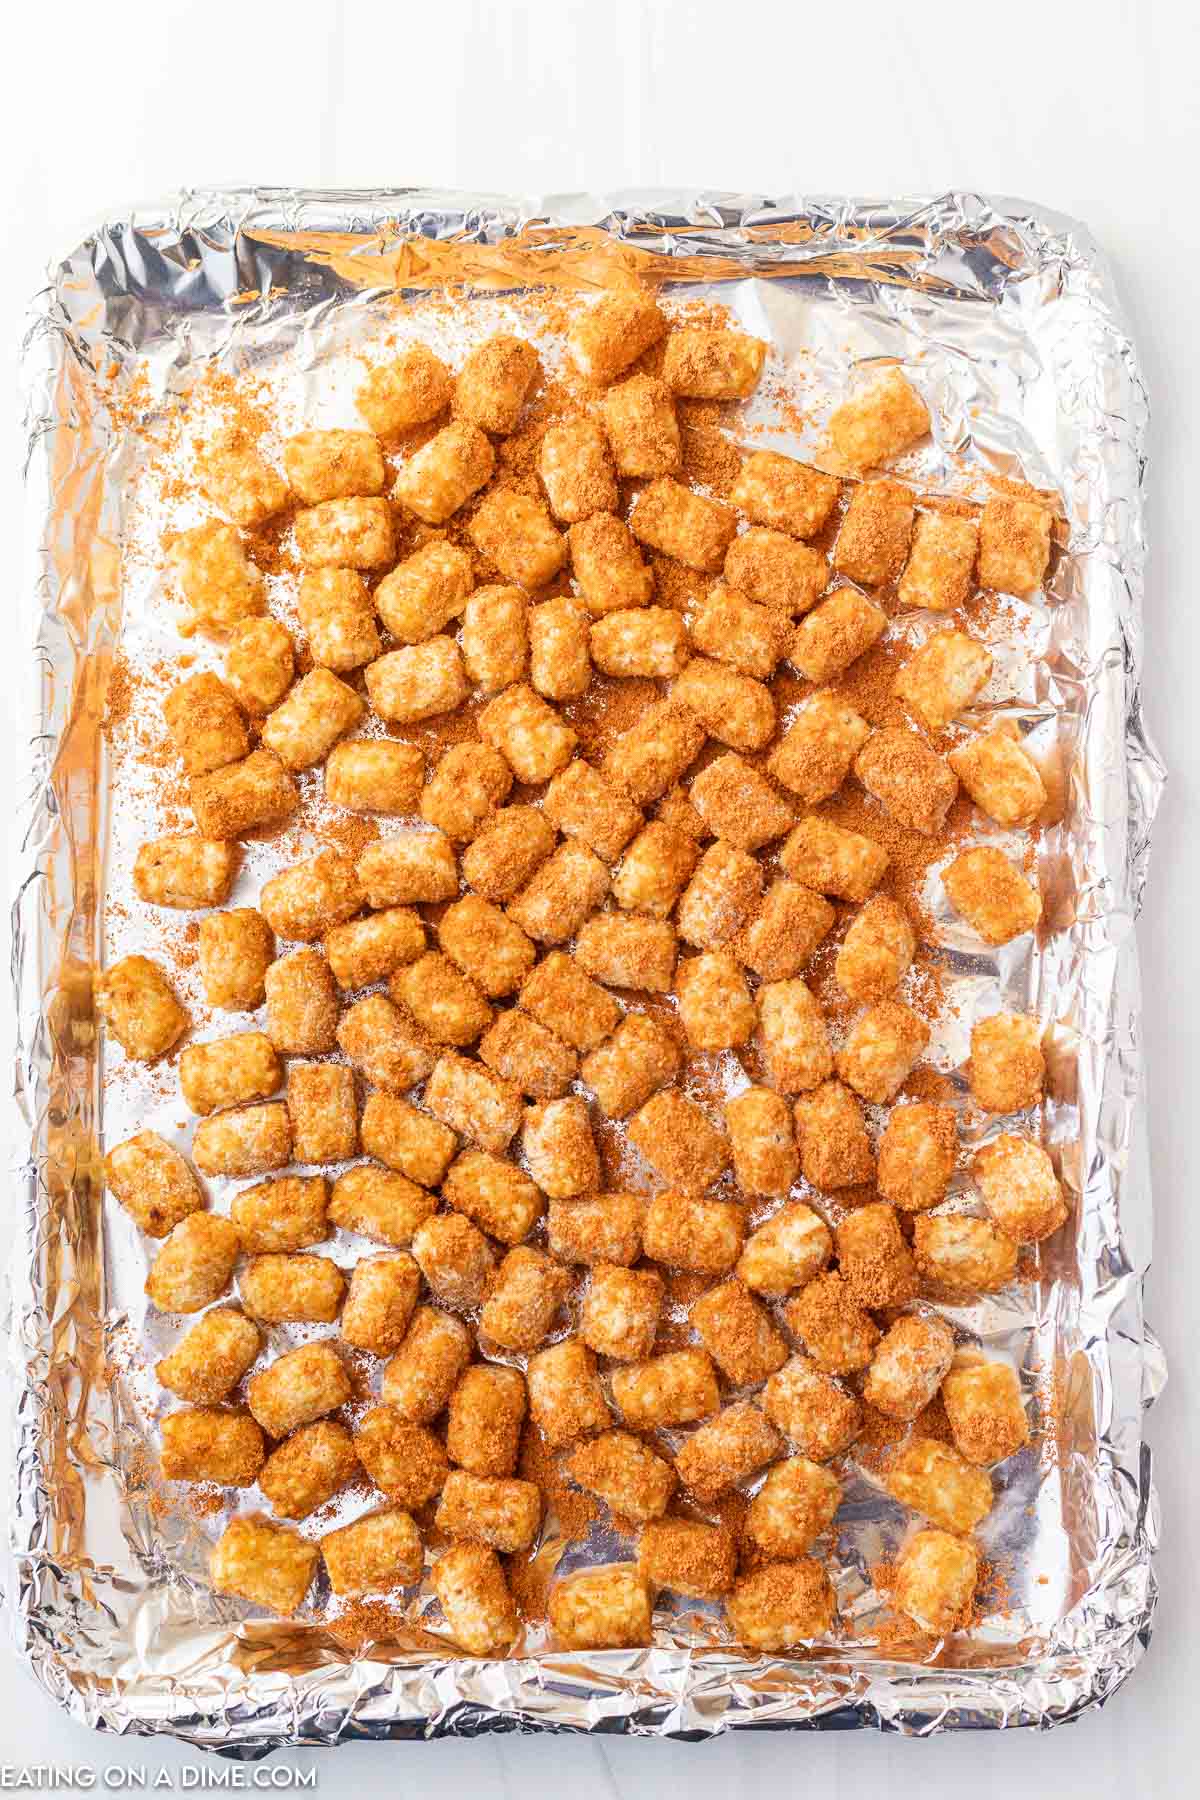 Topping the tots with taco seasoning